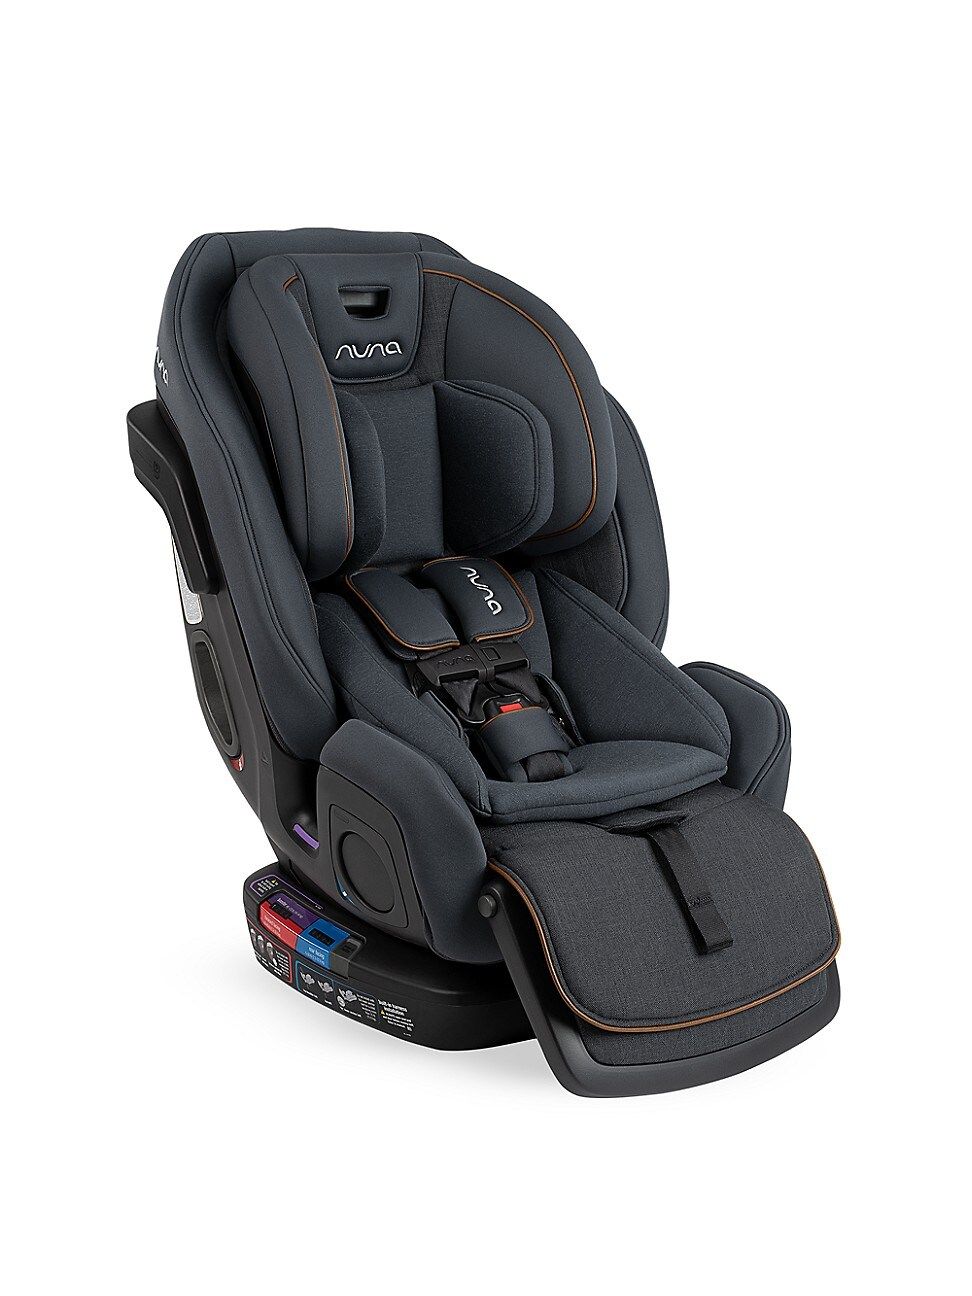 Exec All-In-One Car Seat